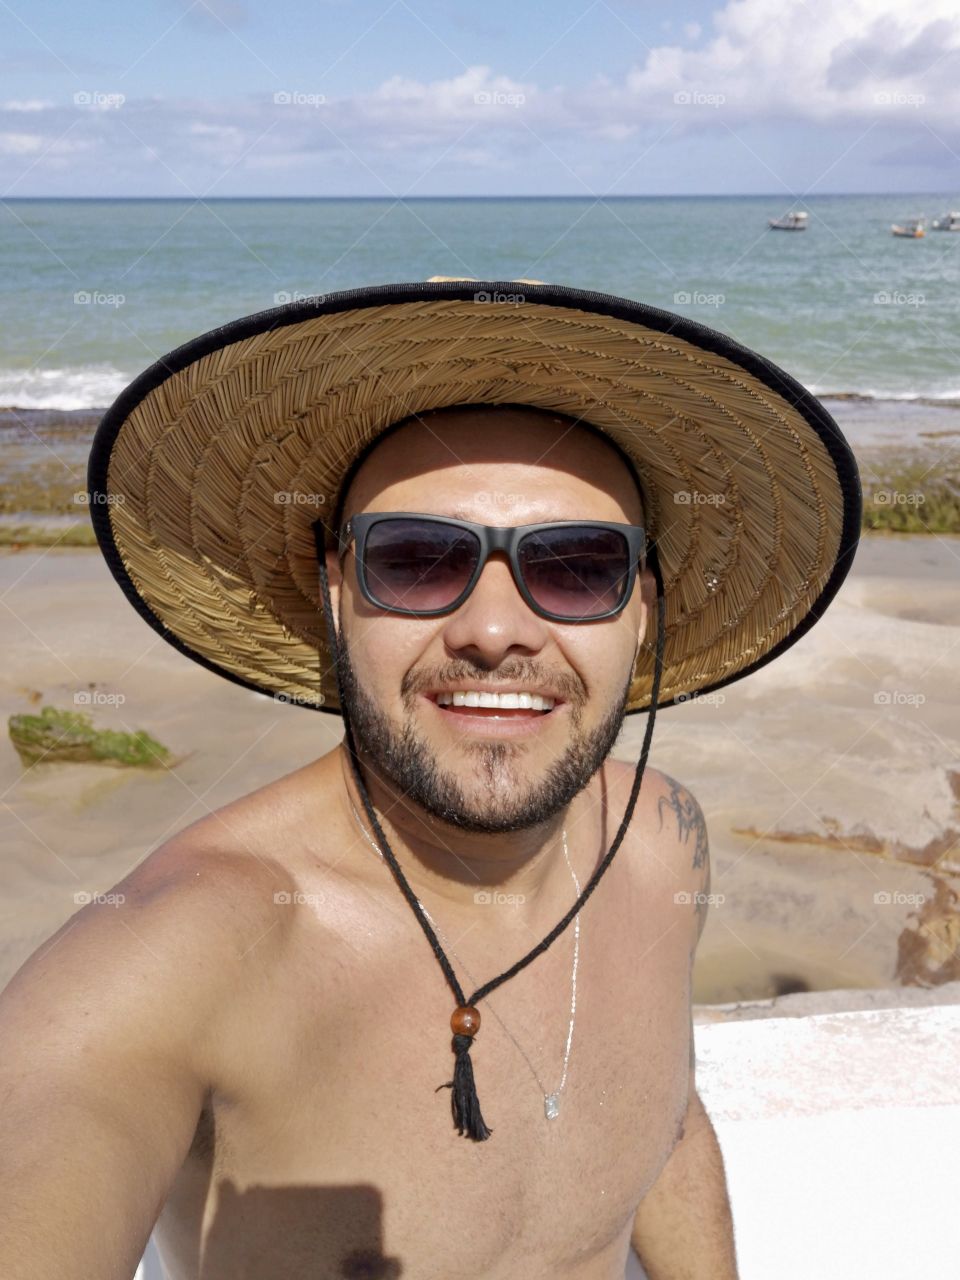 Beach hat man smiling with sea in the background